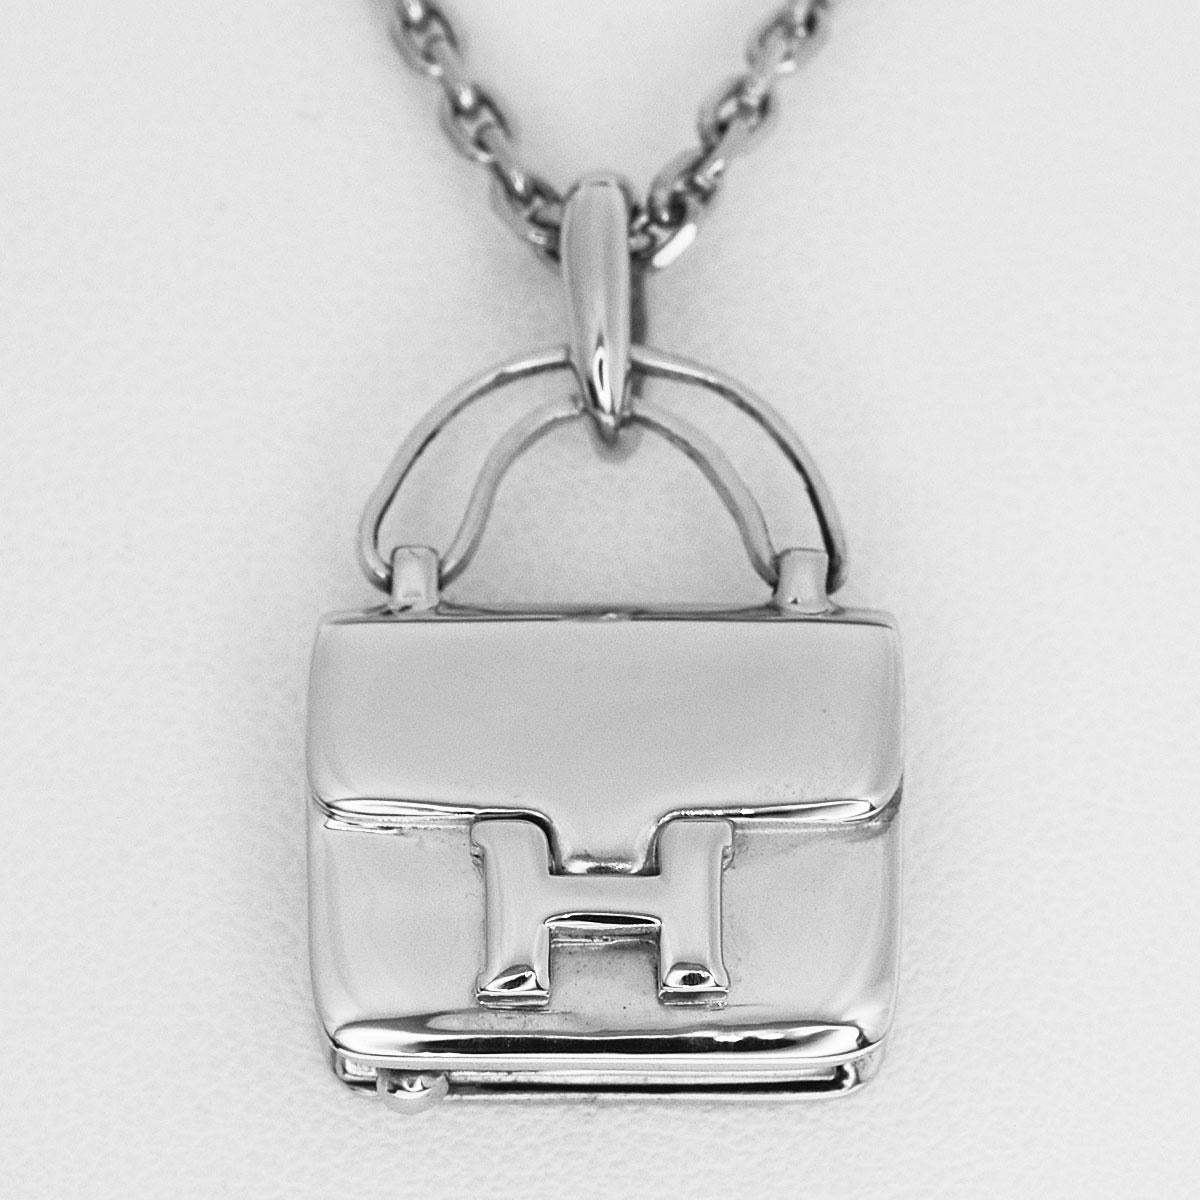 Brand:HERMES
Name:Constance bag motif pendant necklace
Material :925 silver
Comes with:HERMES Case
Necklace Length:49.5cm / 19.48